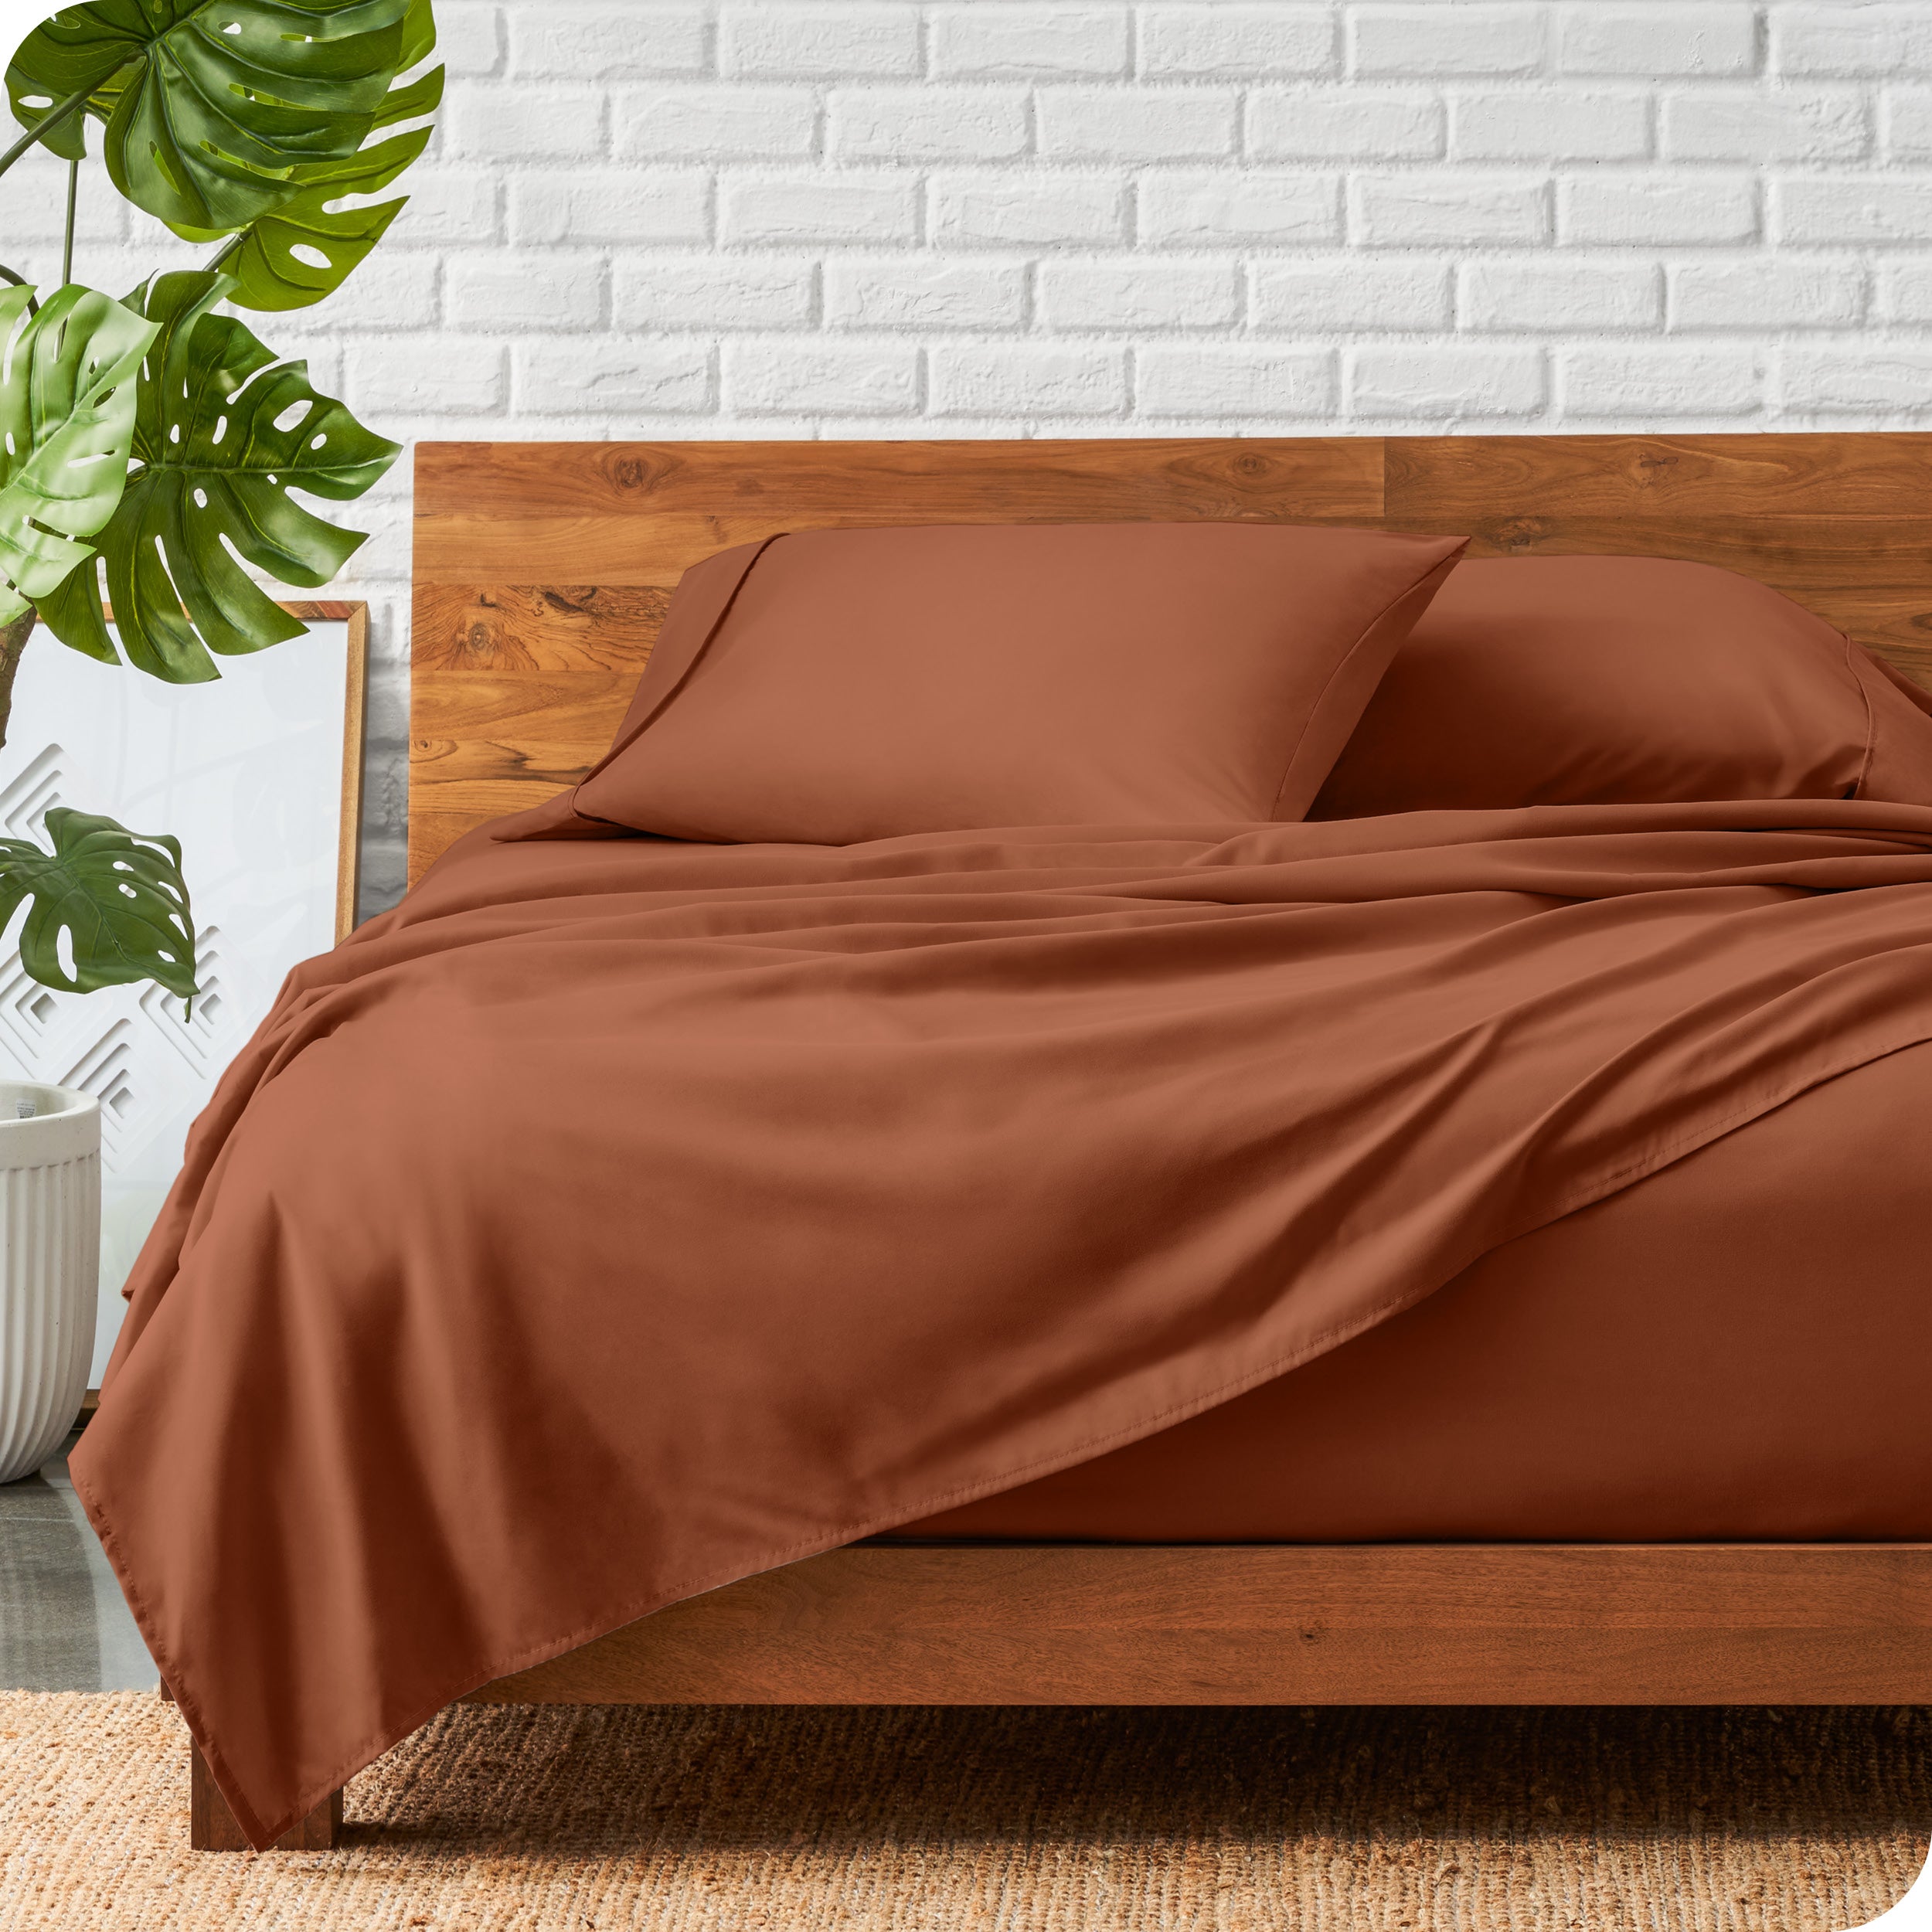 A wooden bed frame with a microfiber sheet set on the mattress.